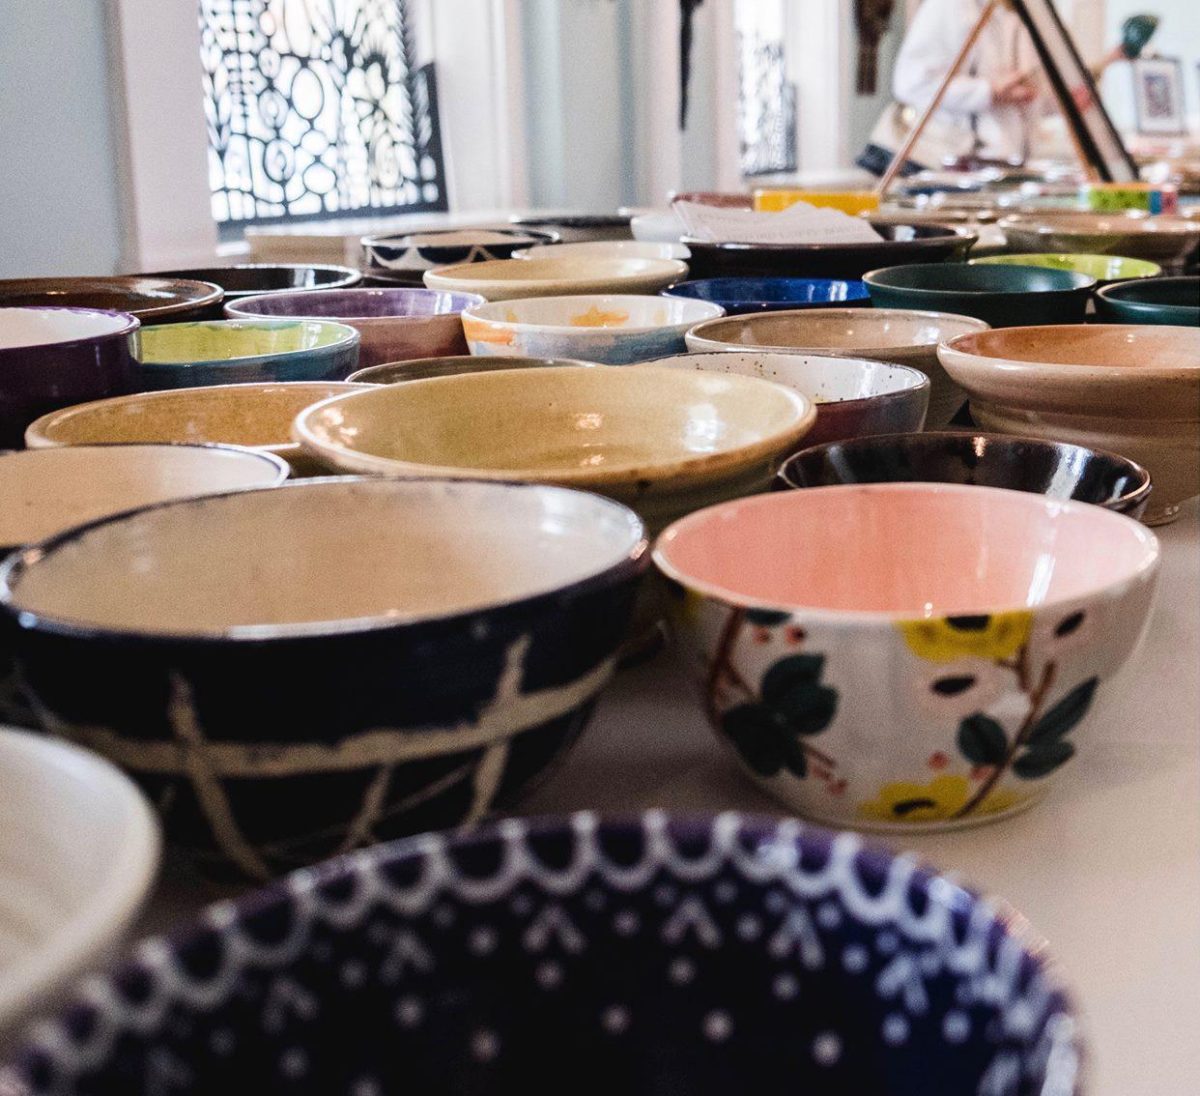 The Oxford Community Arts Center expects to sell up to 1,300 bowls on Saturday. Photo contributed by Oxford Empty Bowls